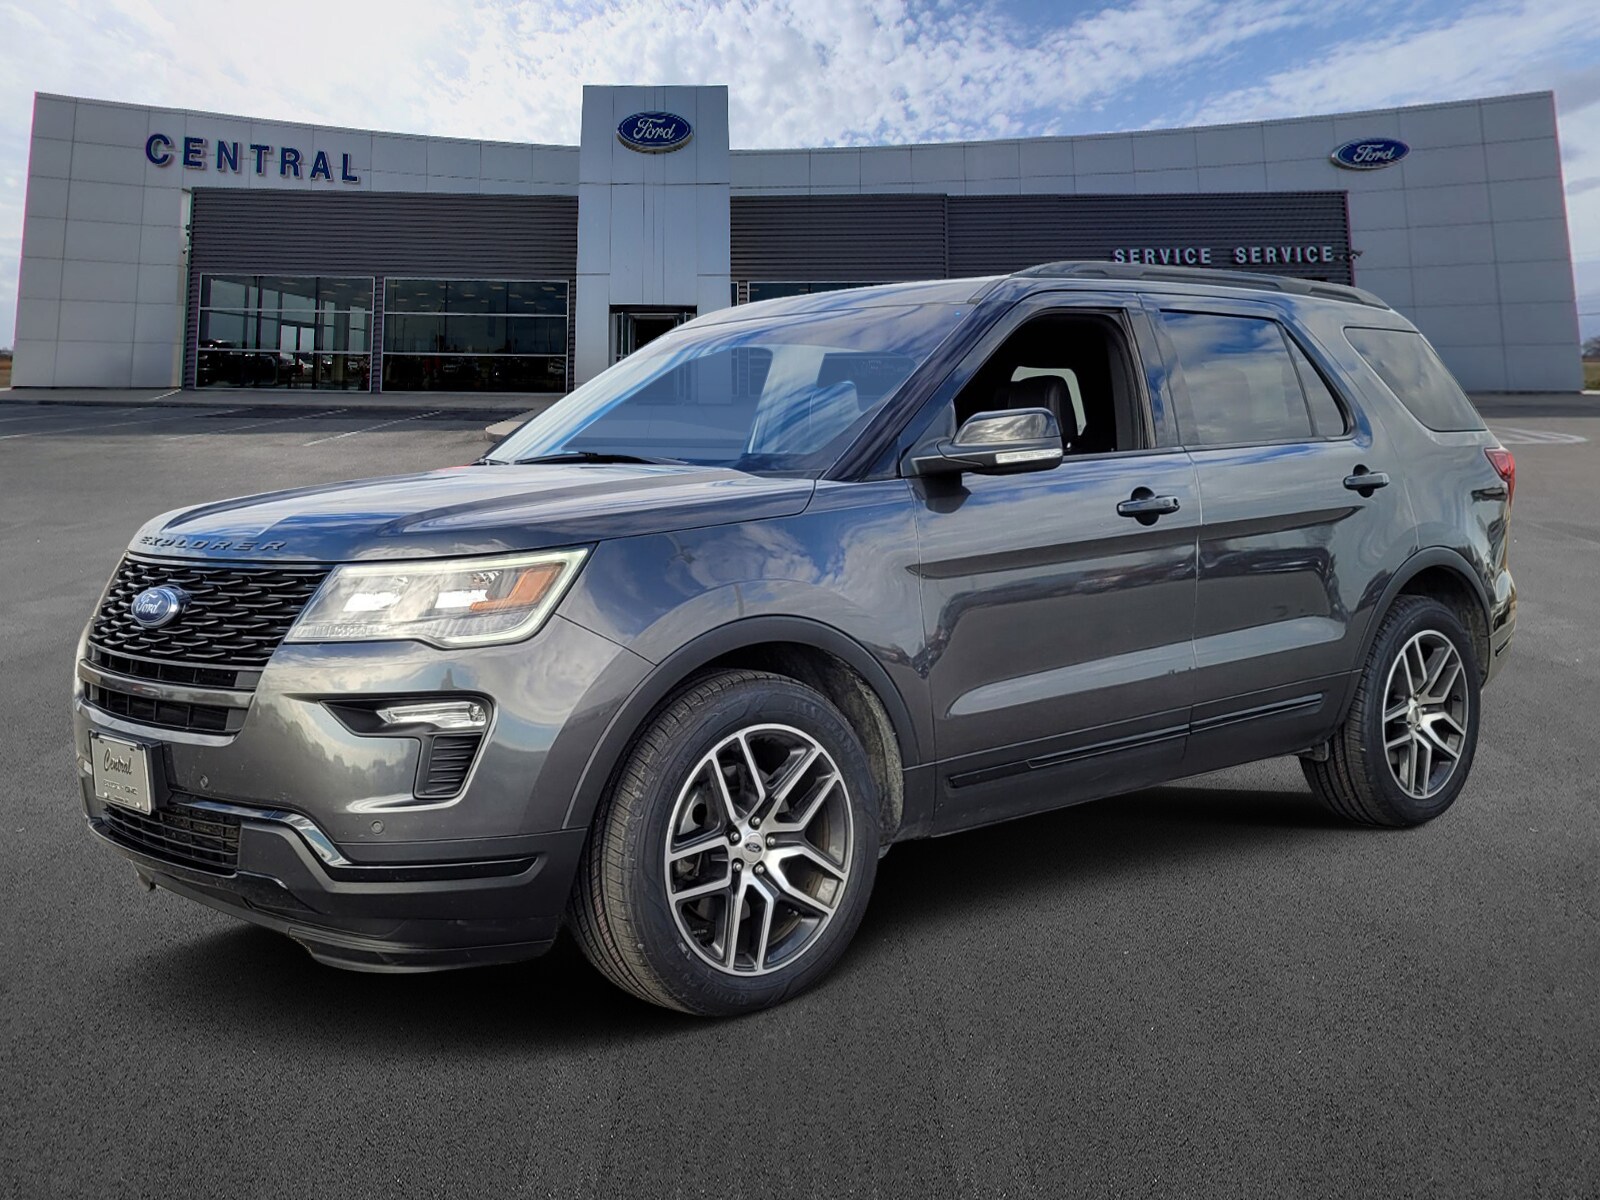 Used 2018 Ford Explorer Sport SUV for Sale in Trumann, AR